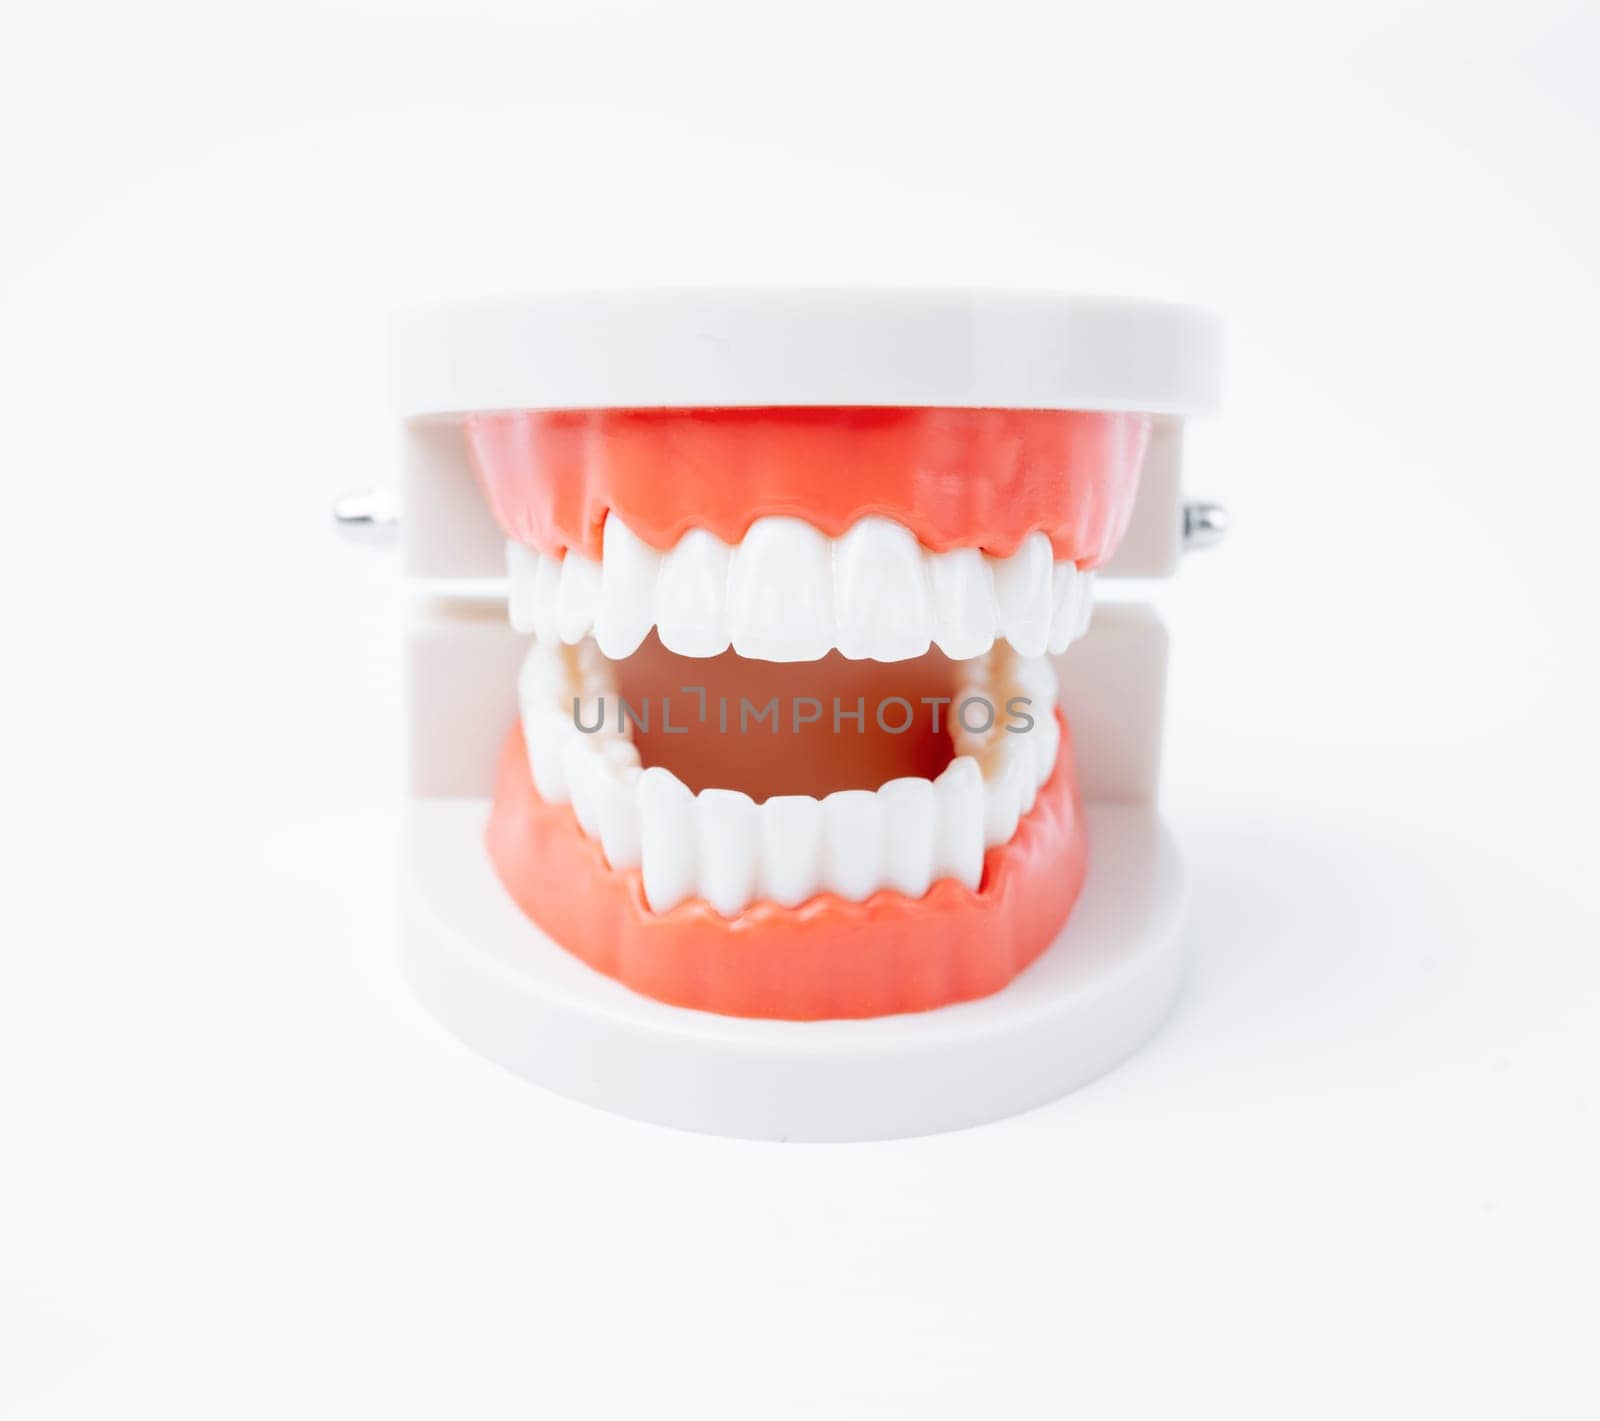 The acrylic human jaw model for studying oral hygiene on white background. by Gamjai